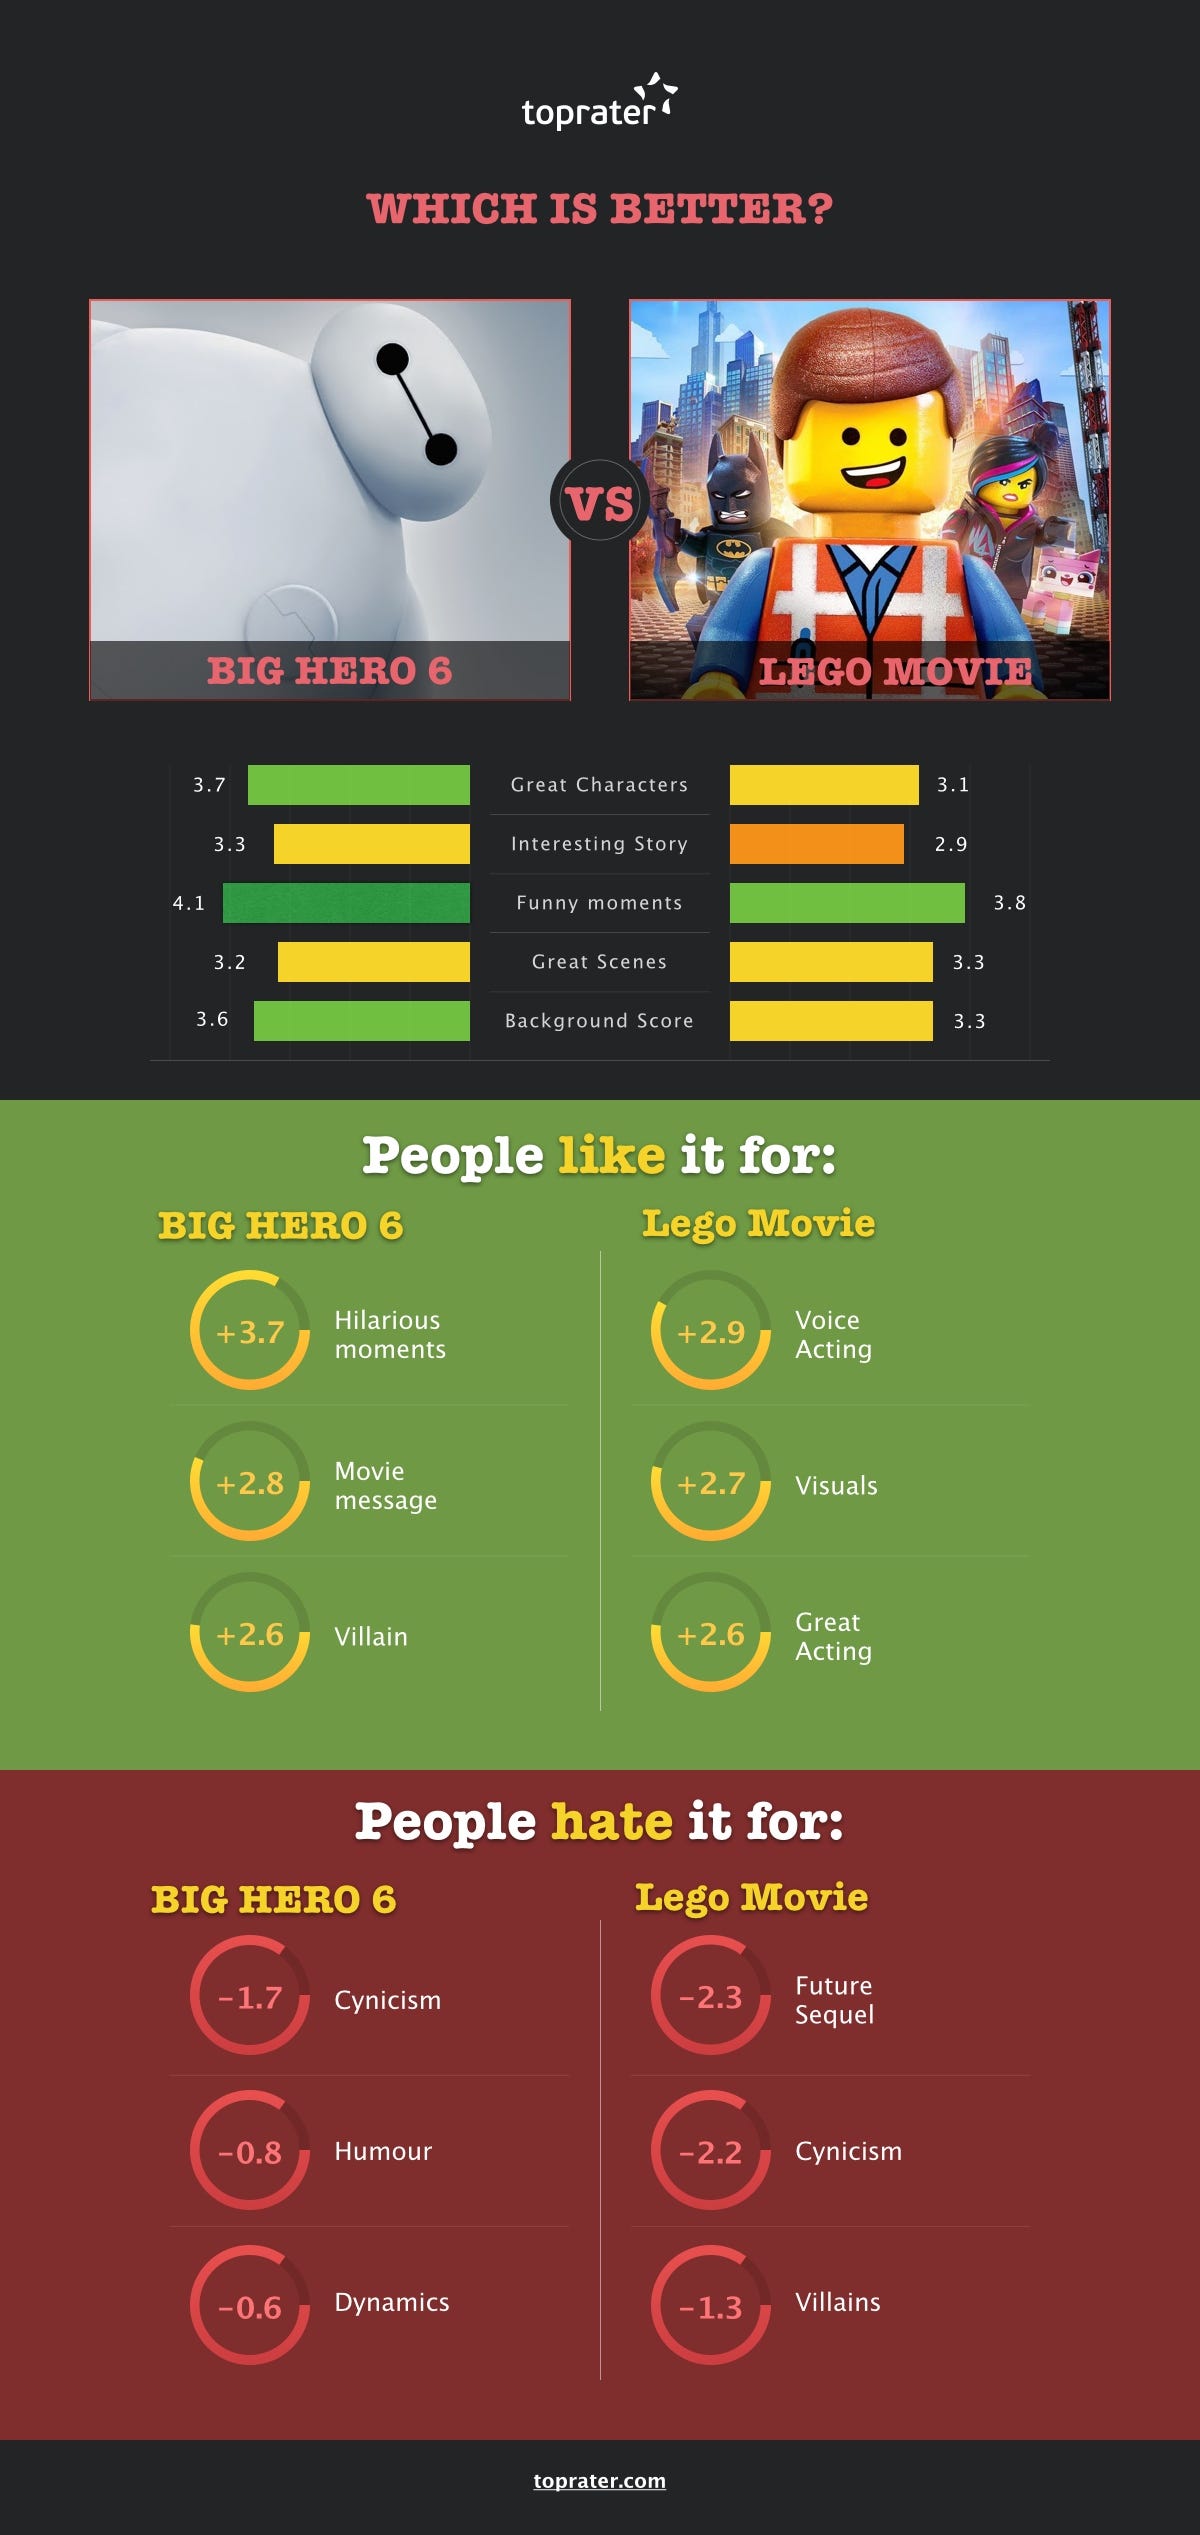 MOVIES: WHICH IS BETTER?. The Lego Movie VS Big Hero 6 | by TopRater |  Medium